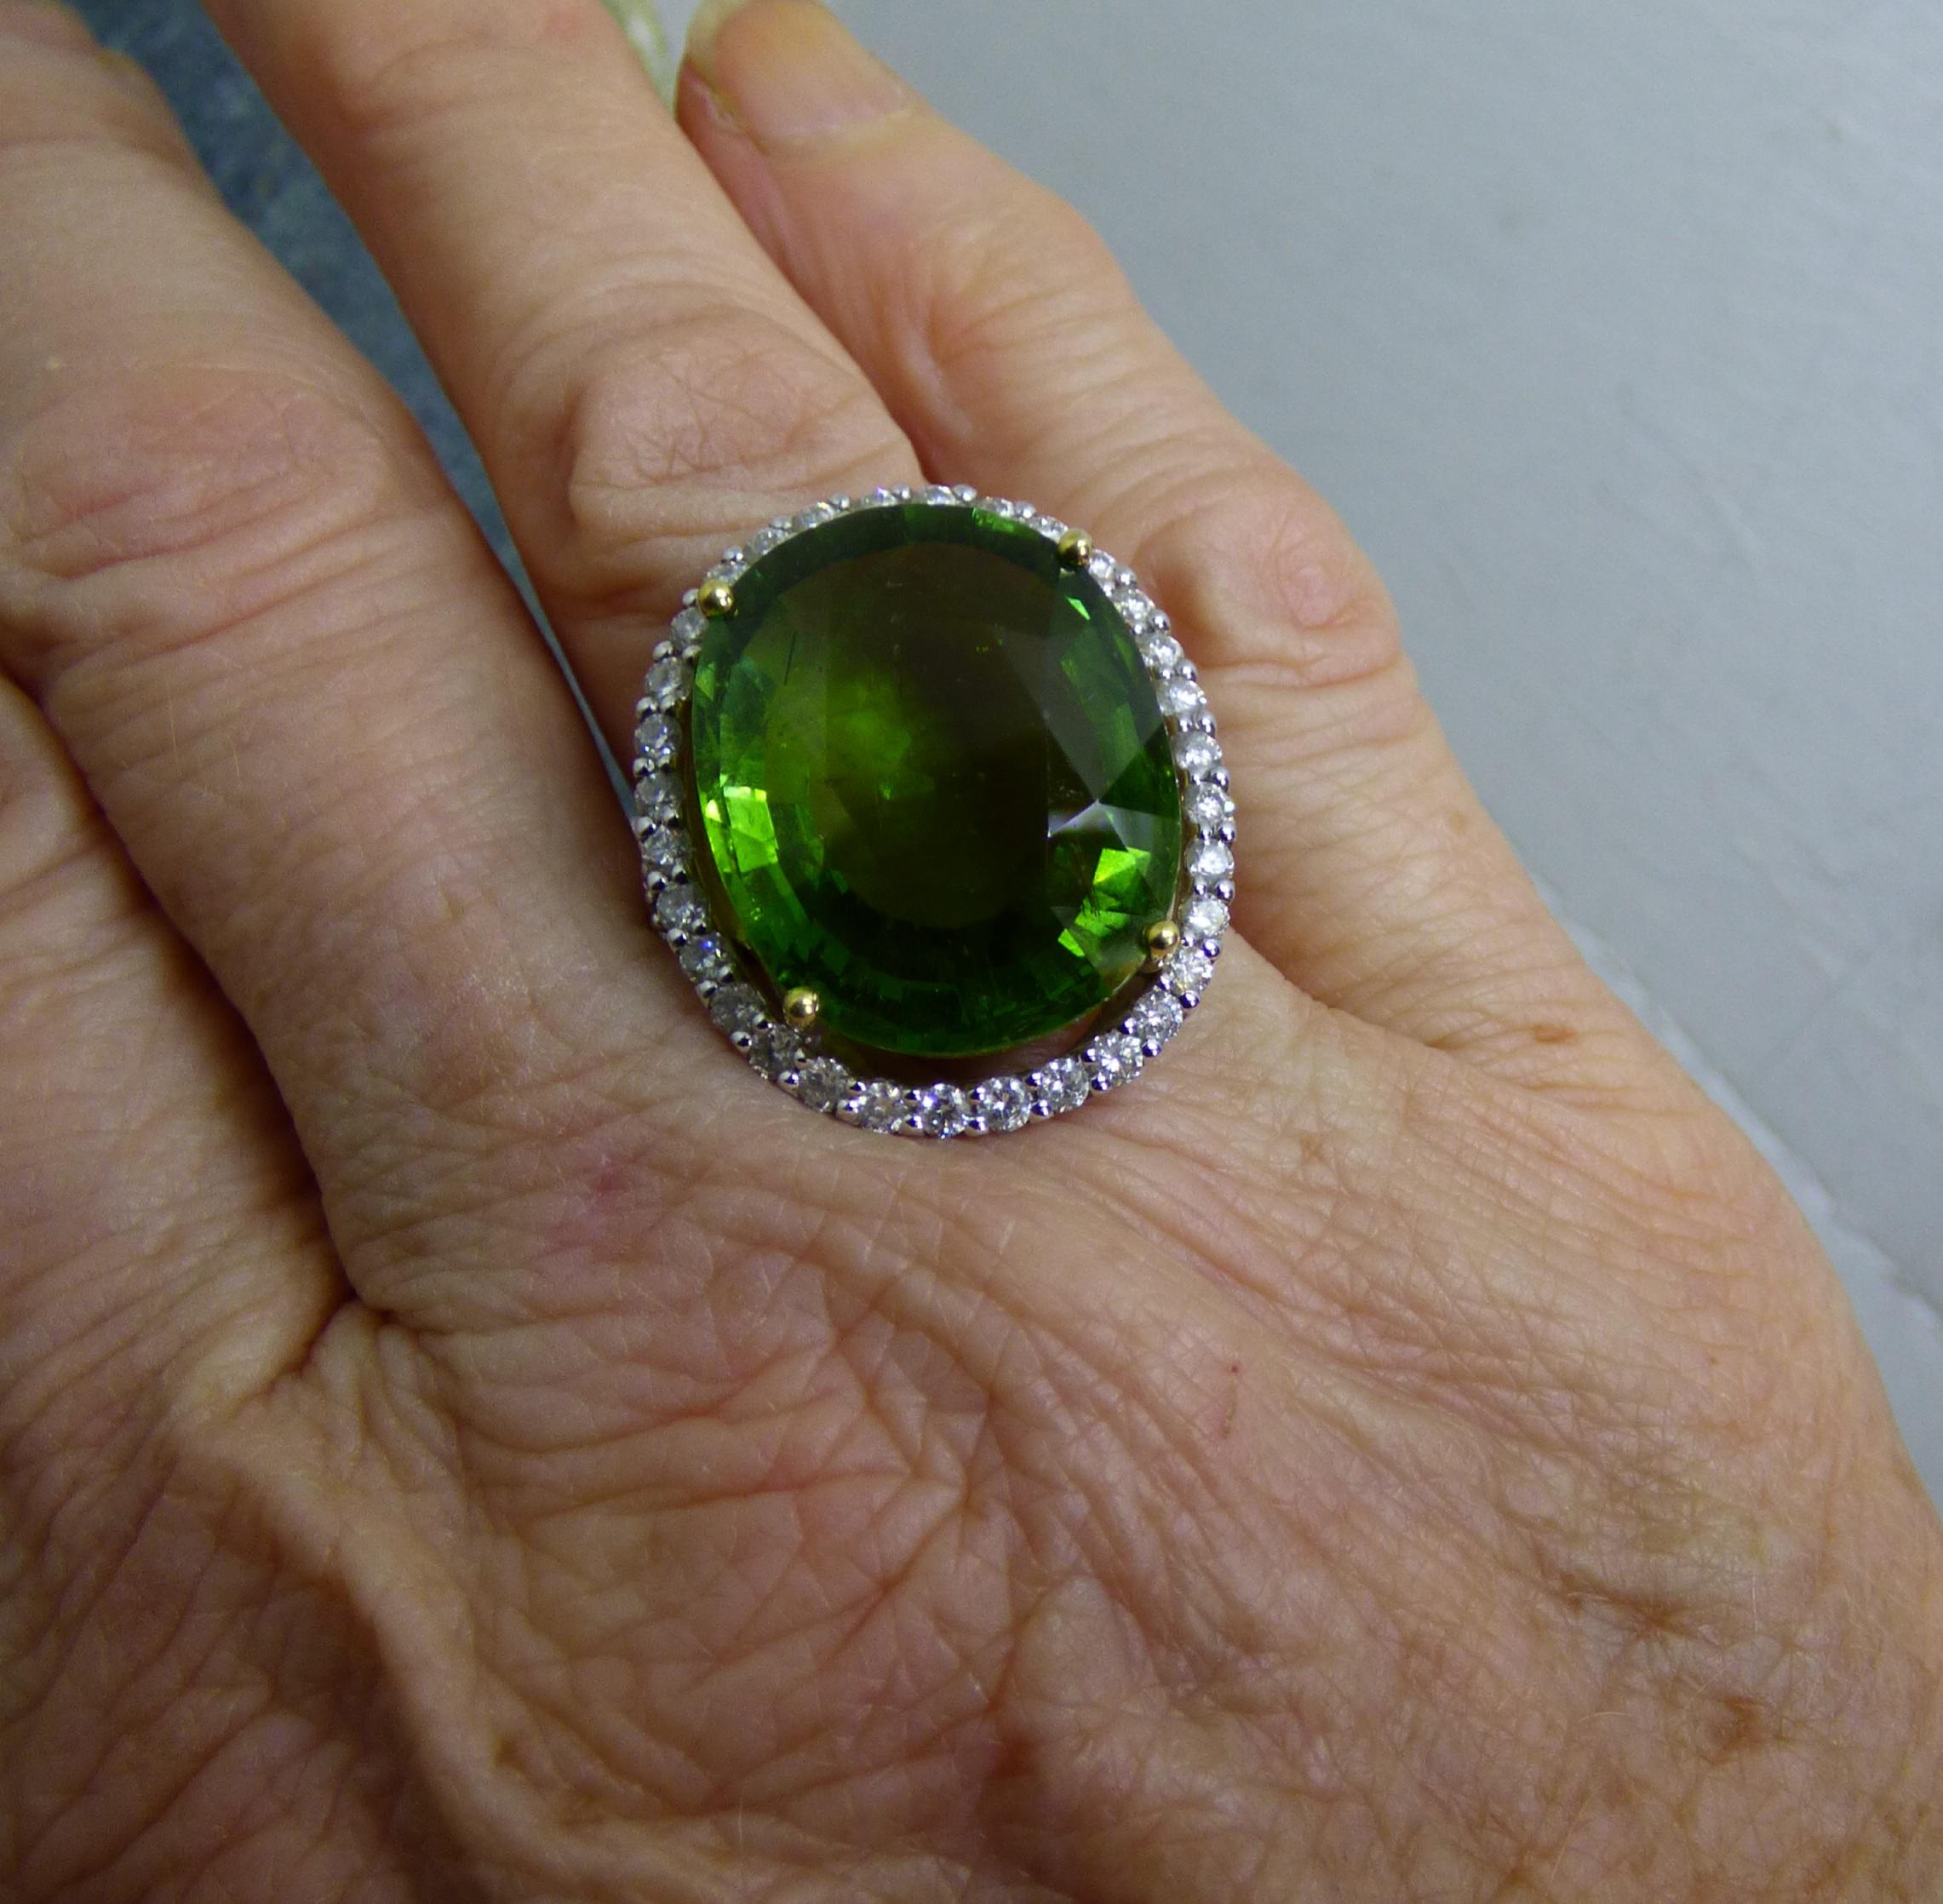 Clean and bright green Tourmaline oval cut stone (22.12ct) is surrounded by Diamonds with Diamonds set on the side shanks. Total Diamond weight is 1.70ct.   The total size of the cluster is 20X16mm. The ring is handmade in 18K white gold with yellow